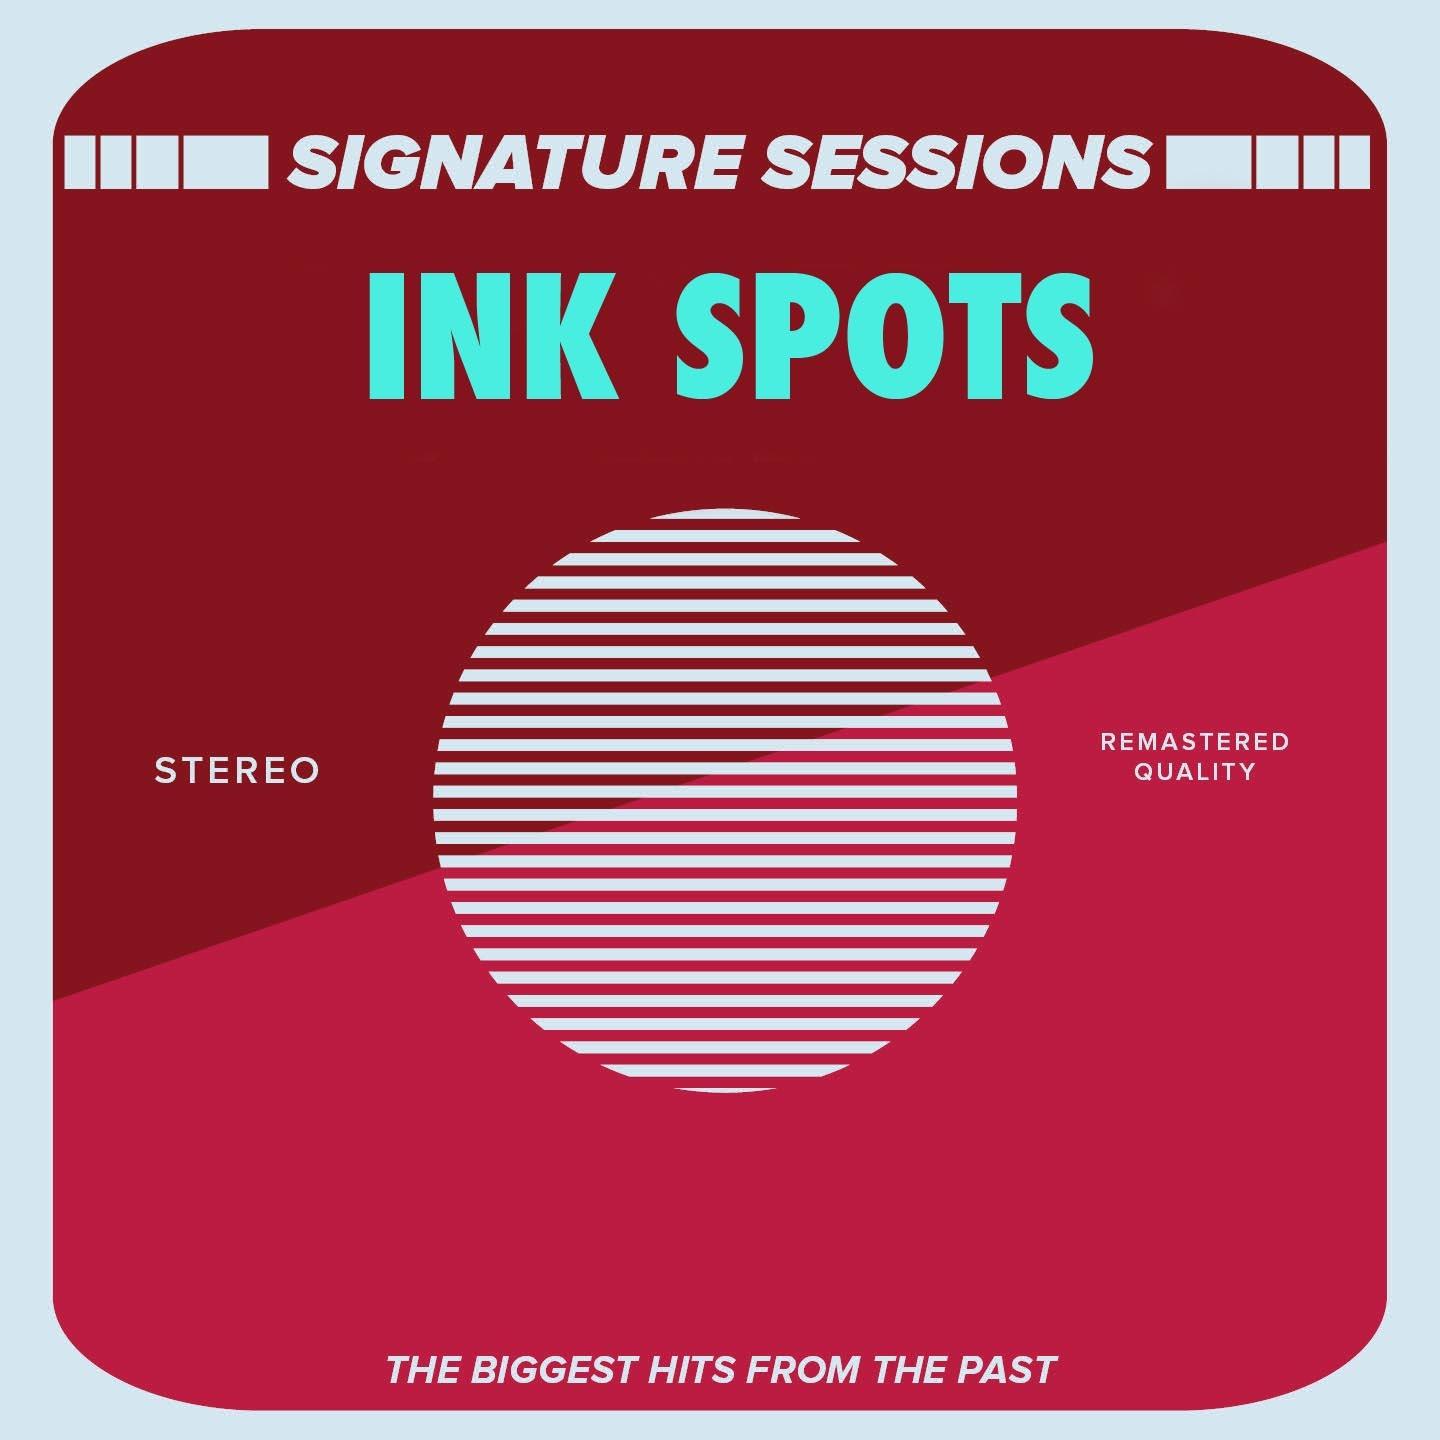 The Signature Sessions